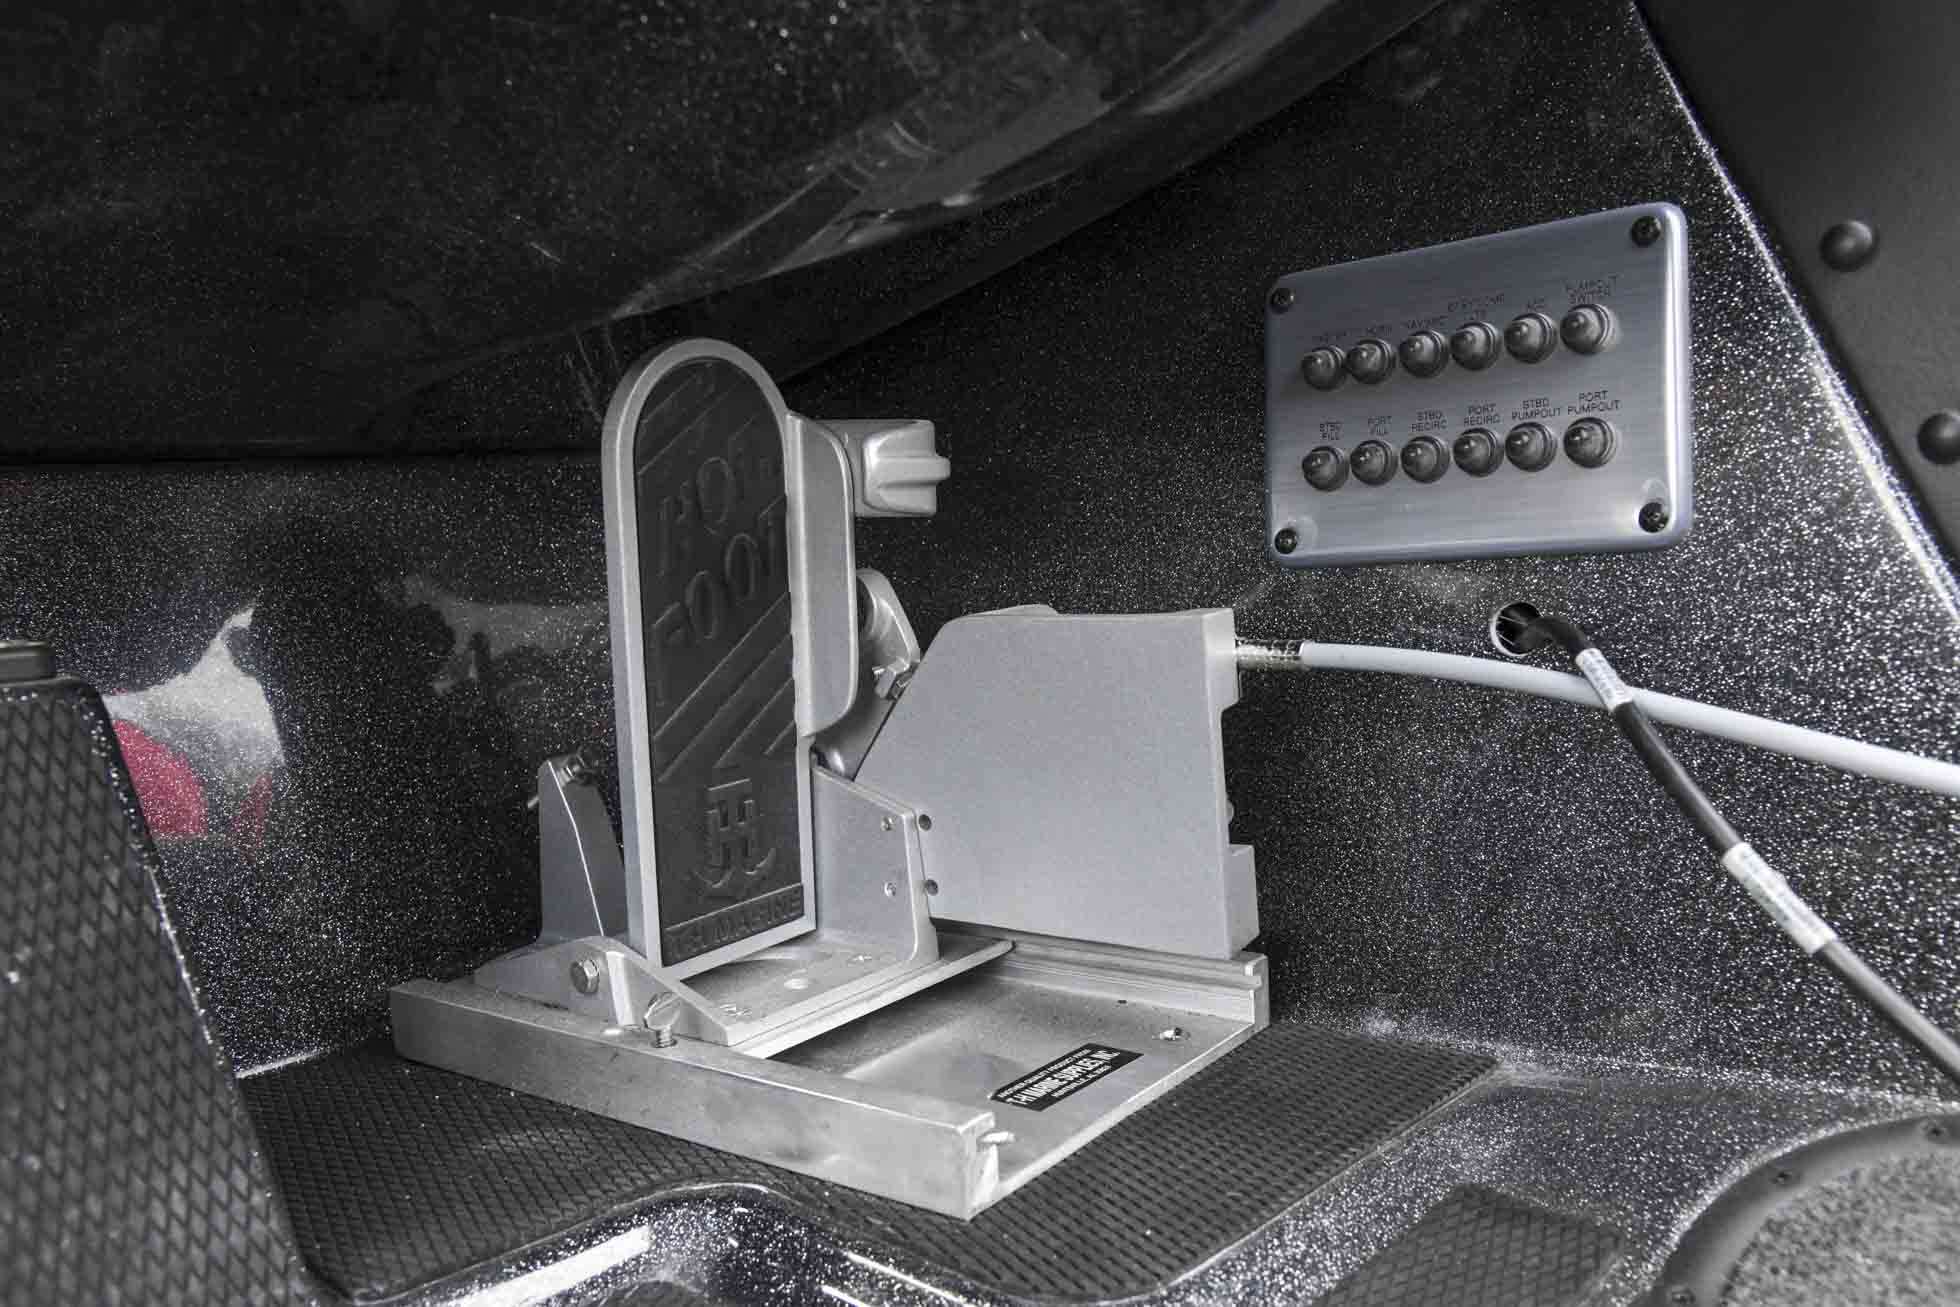  A T-H Marine Hot Foot allows Mullins to control speed just like heâs driving a car. Also under the console is a fuse panel so he can easily and quickly diagnose and reset any tripped fuse.